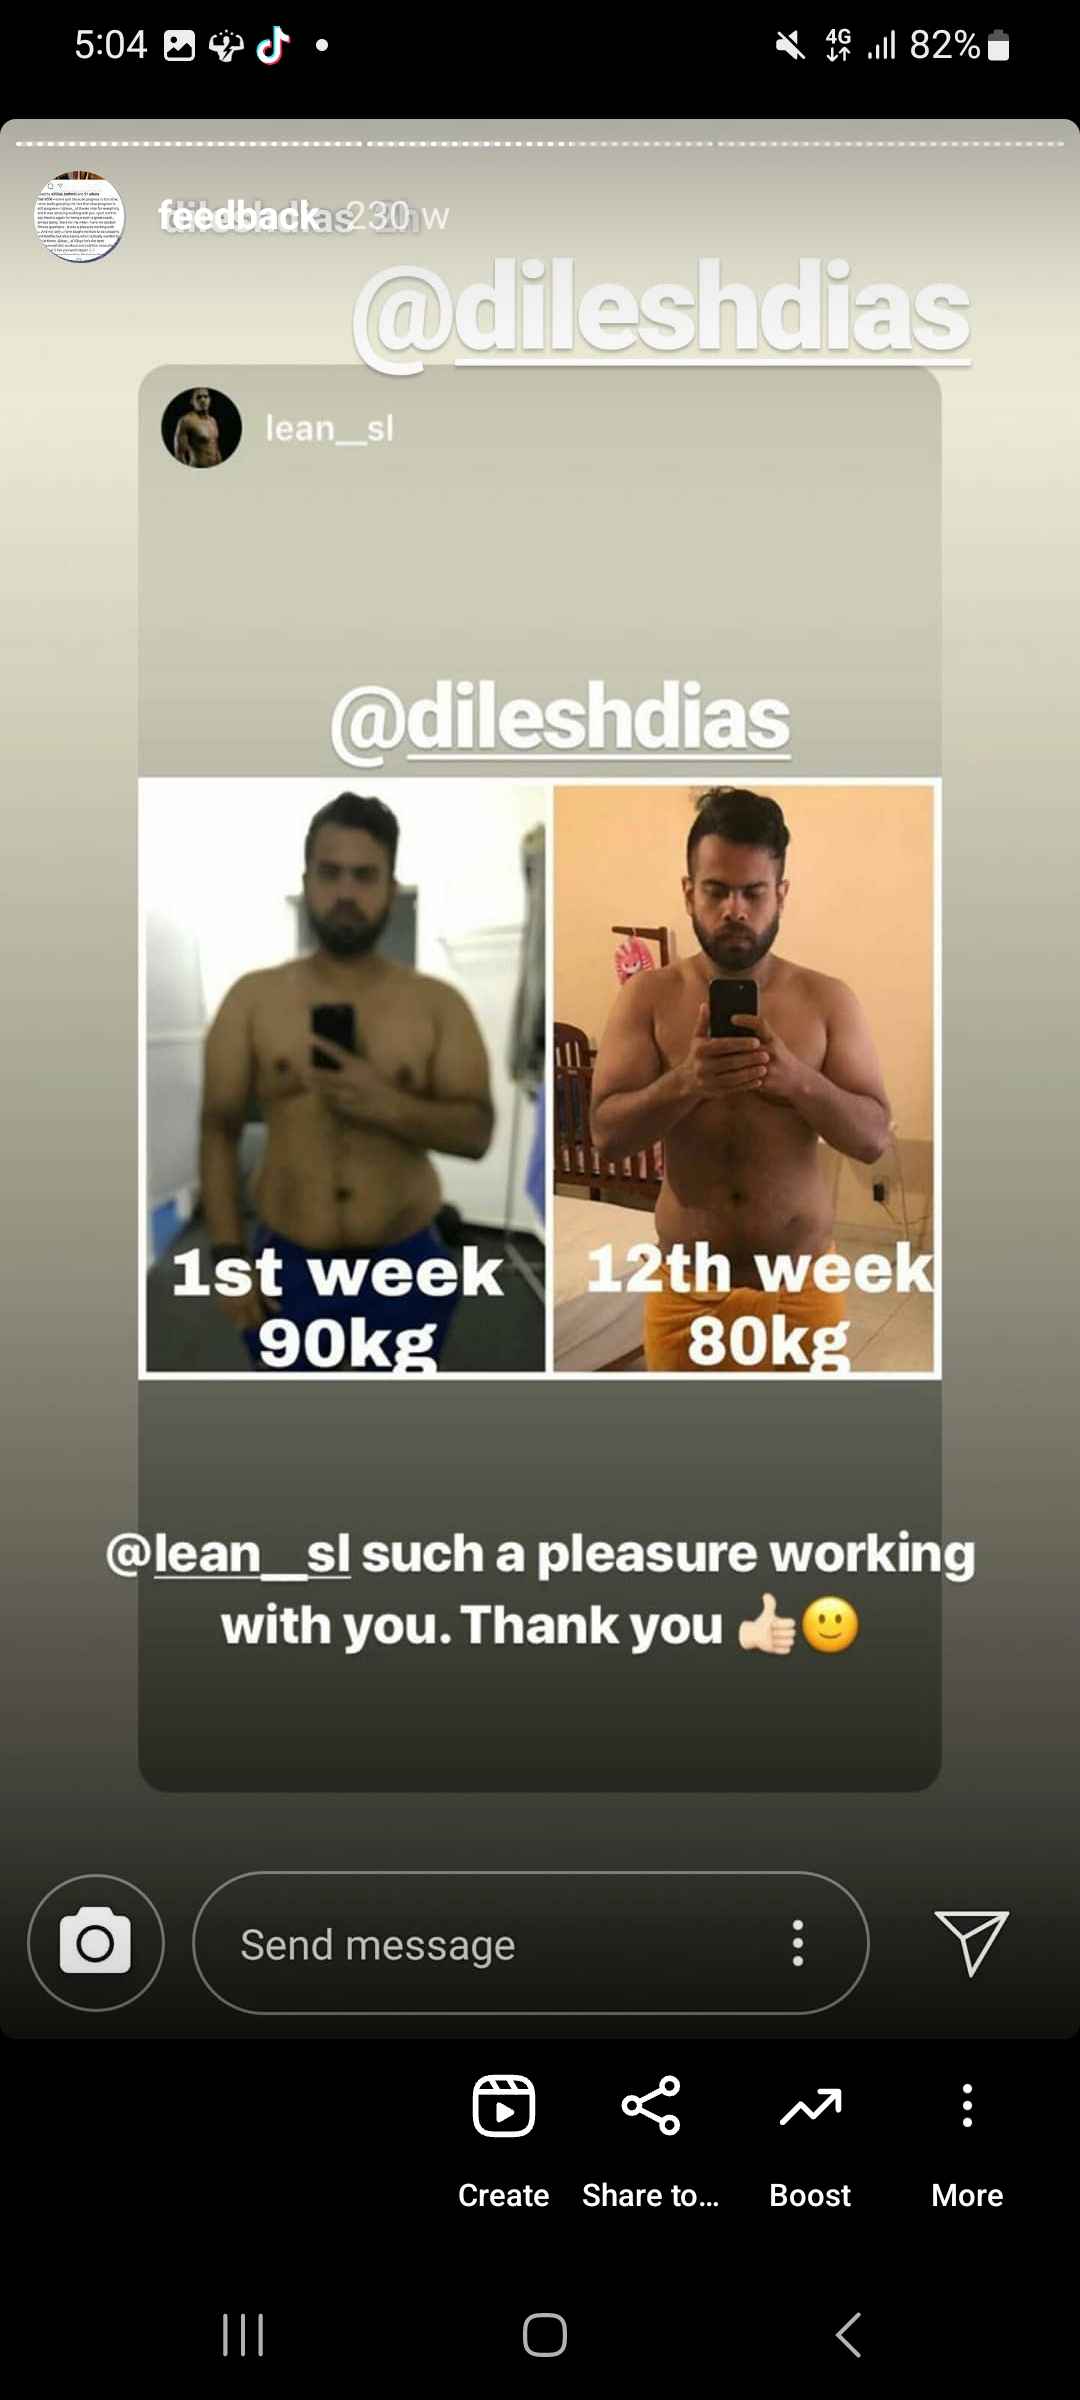 fitness instagram, fitness coach instagram, fitness pages on instagram